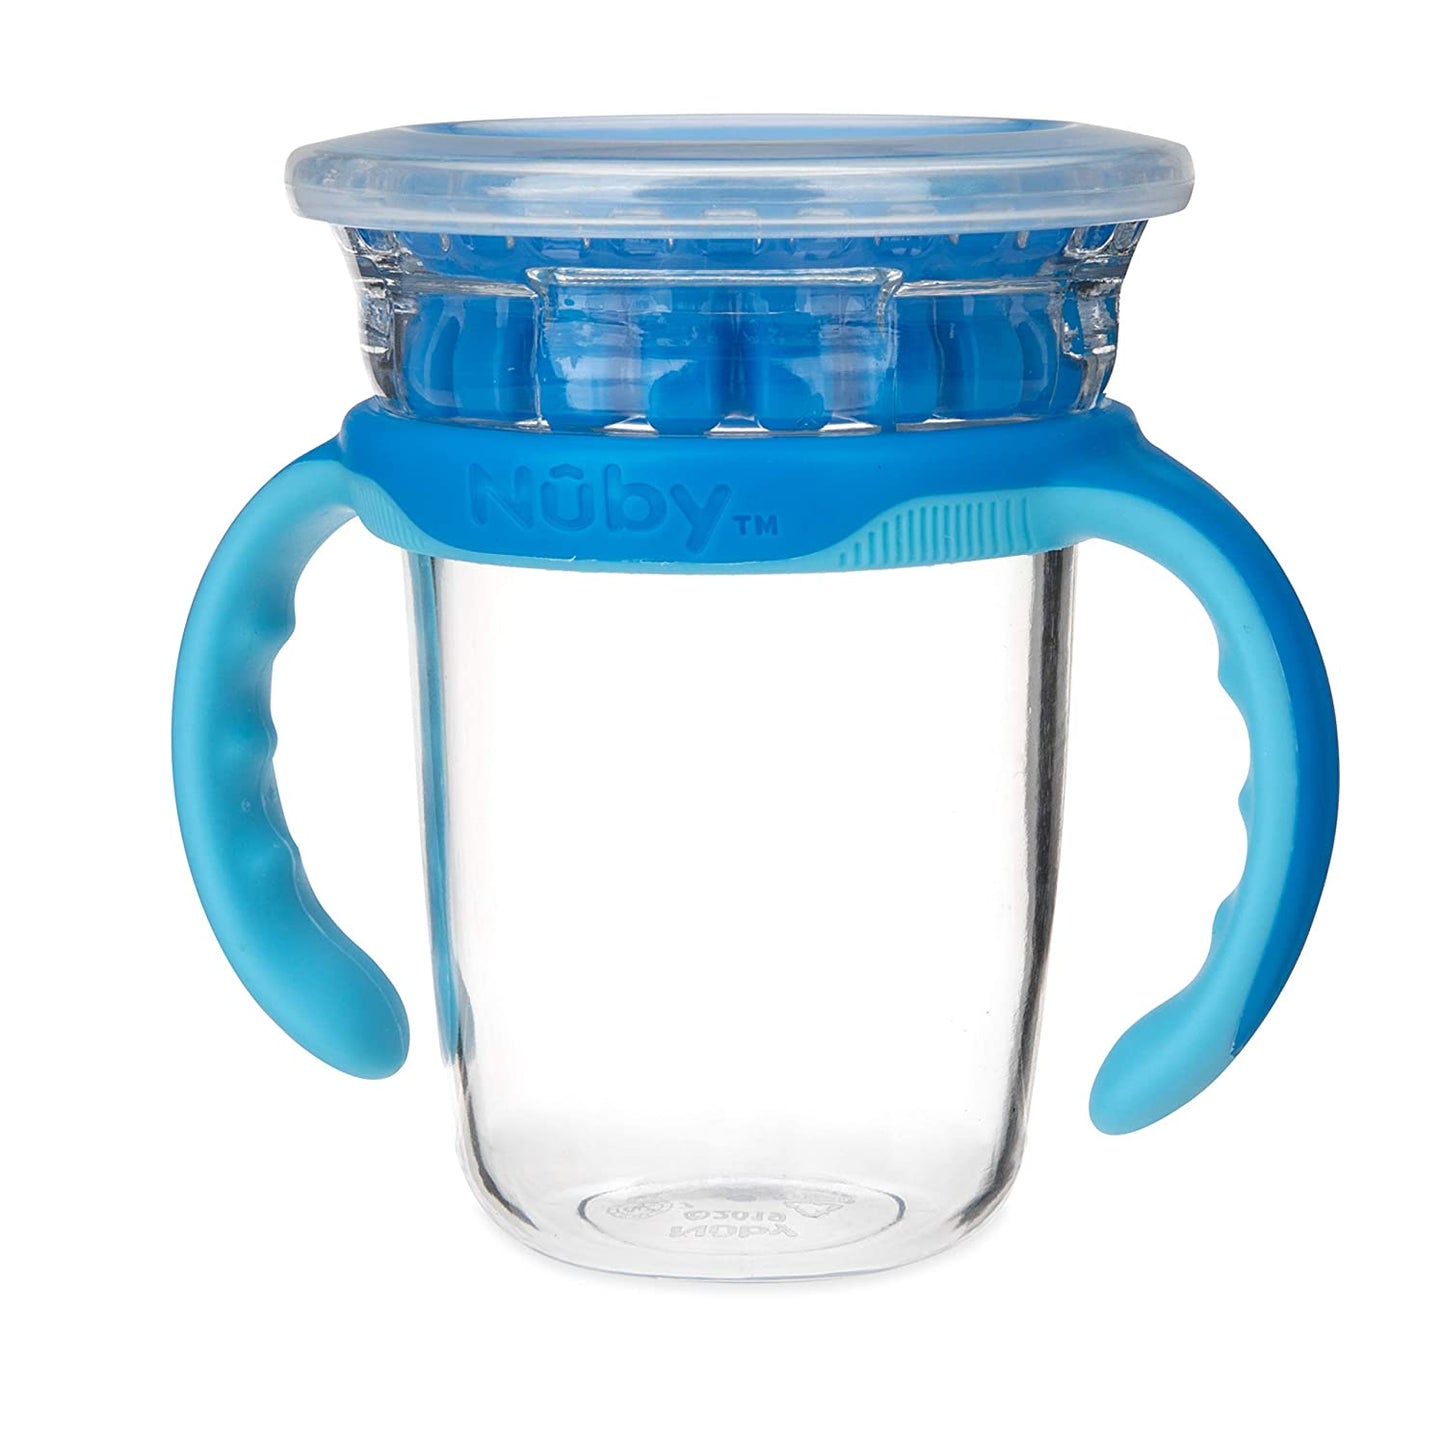 Luv N Care/NUBY Nuby 360 Edge 2 Stage Drinking Rim Cup with Removable Handles & hygienic Cover: 8 Oz/ 240 Ml